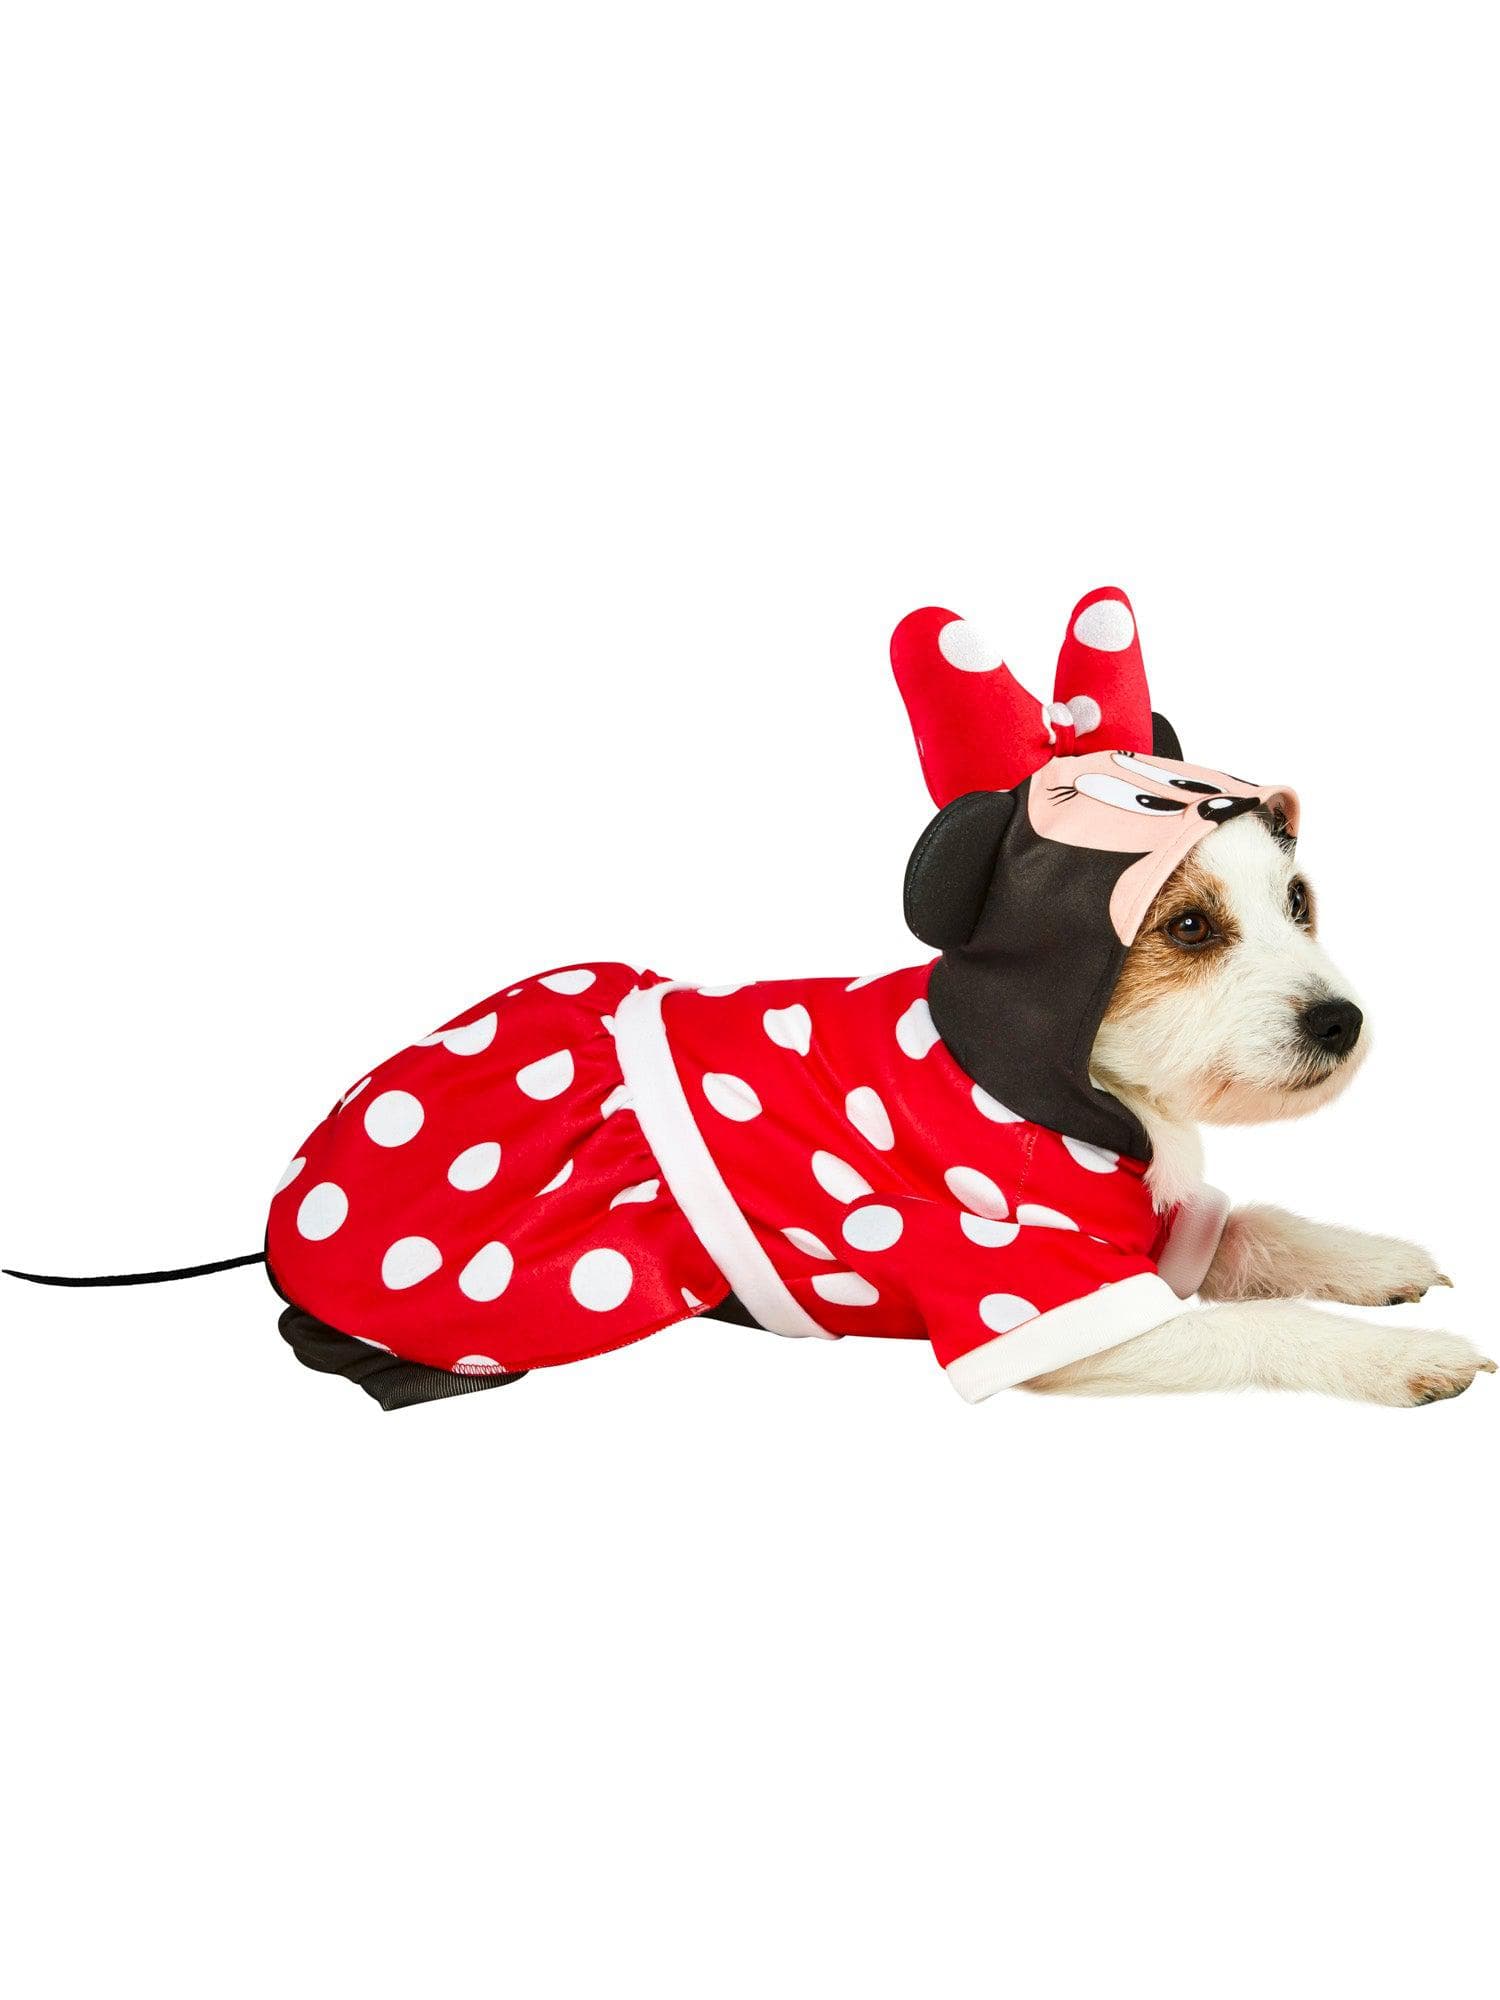 Minnie Mouse Pet Jumpsuit with Hood - costumes.com